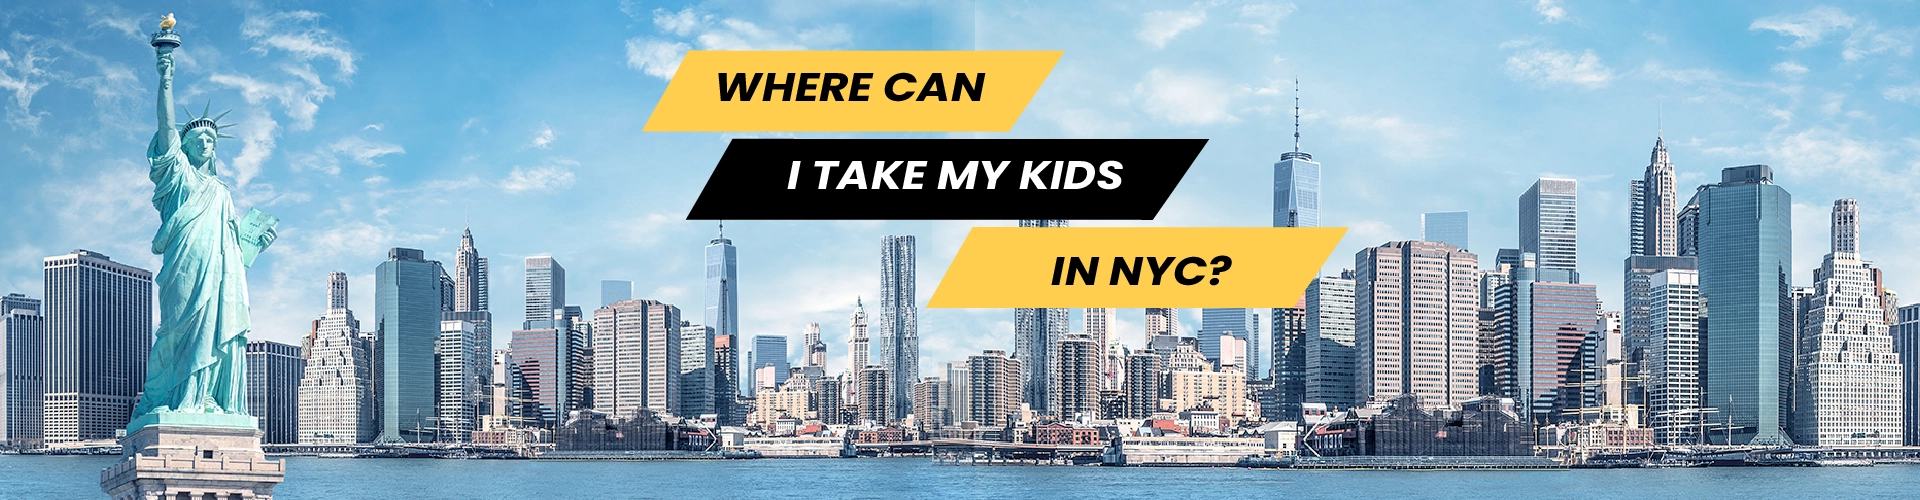 take my kids in NYC